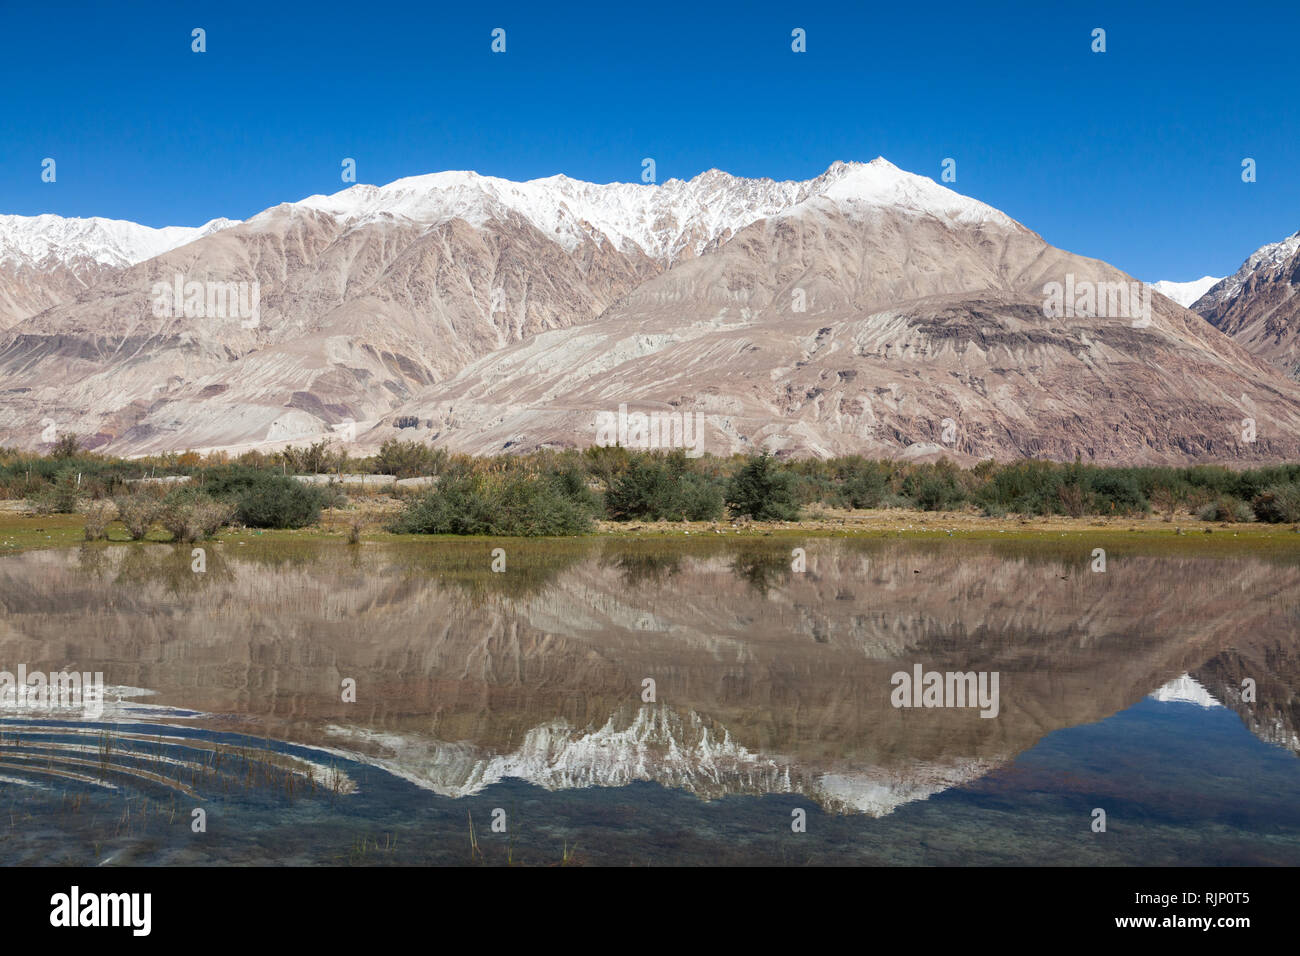 Landscape with snow-capped mountains reflecting in the water, Nubra Valley, Ladakh, Jammu and Kashmir, India Stock Photo